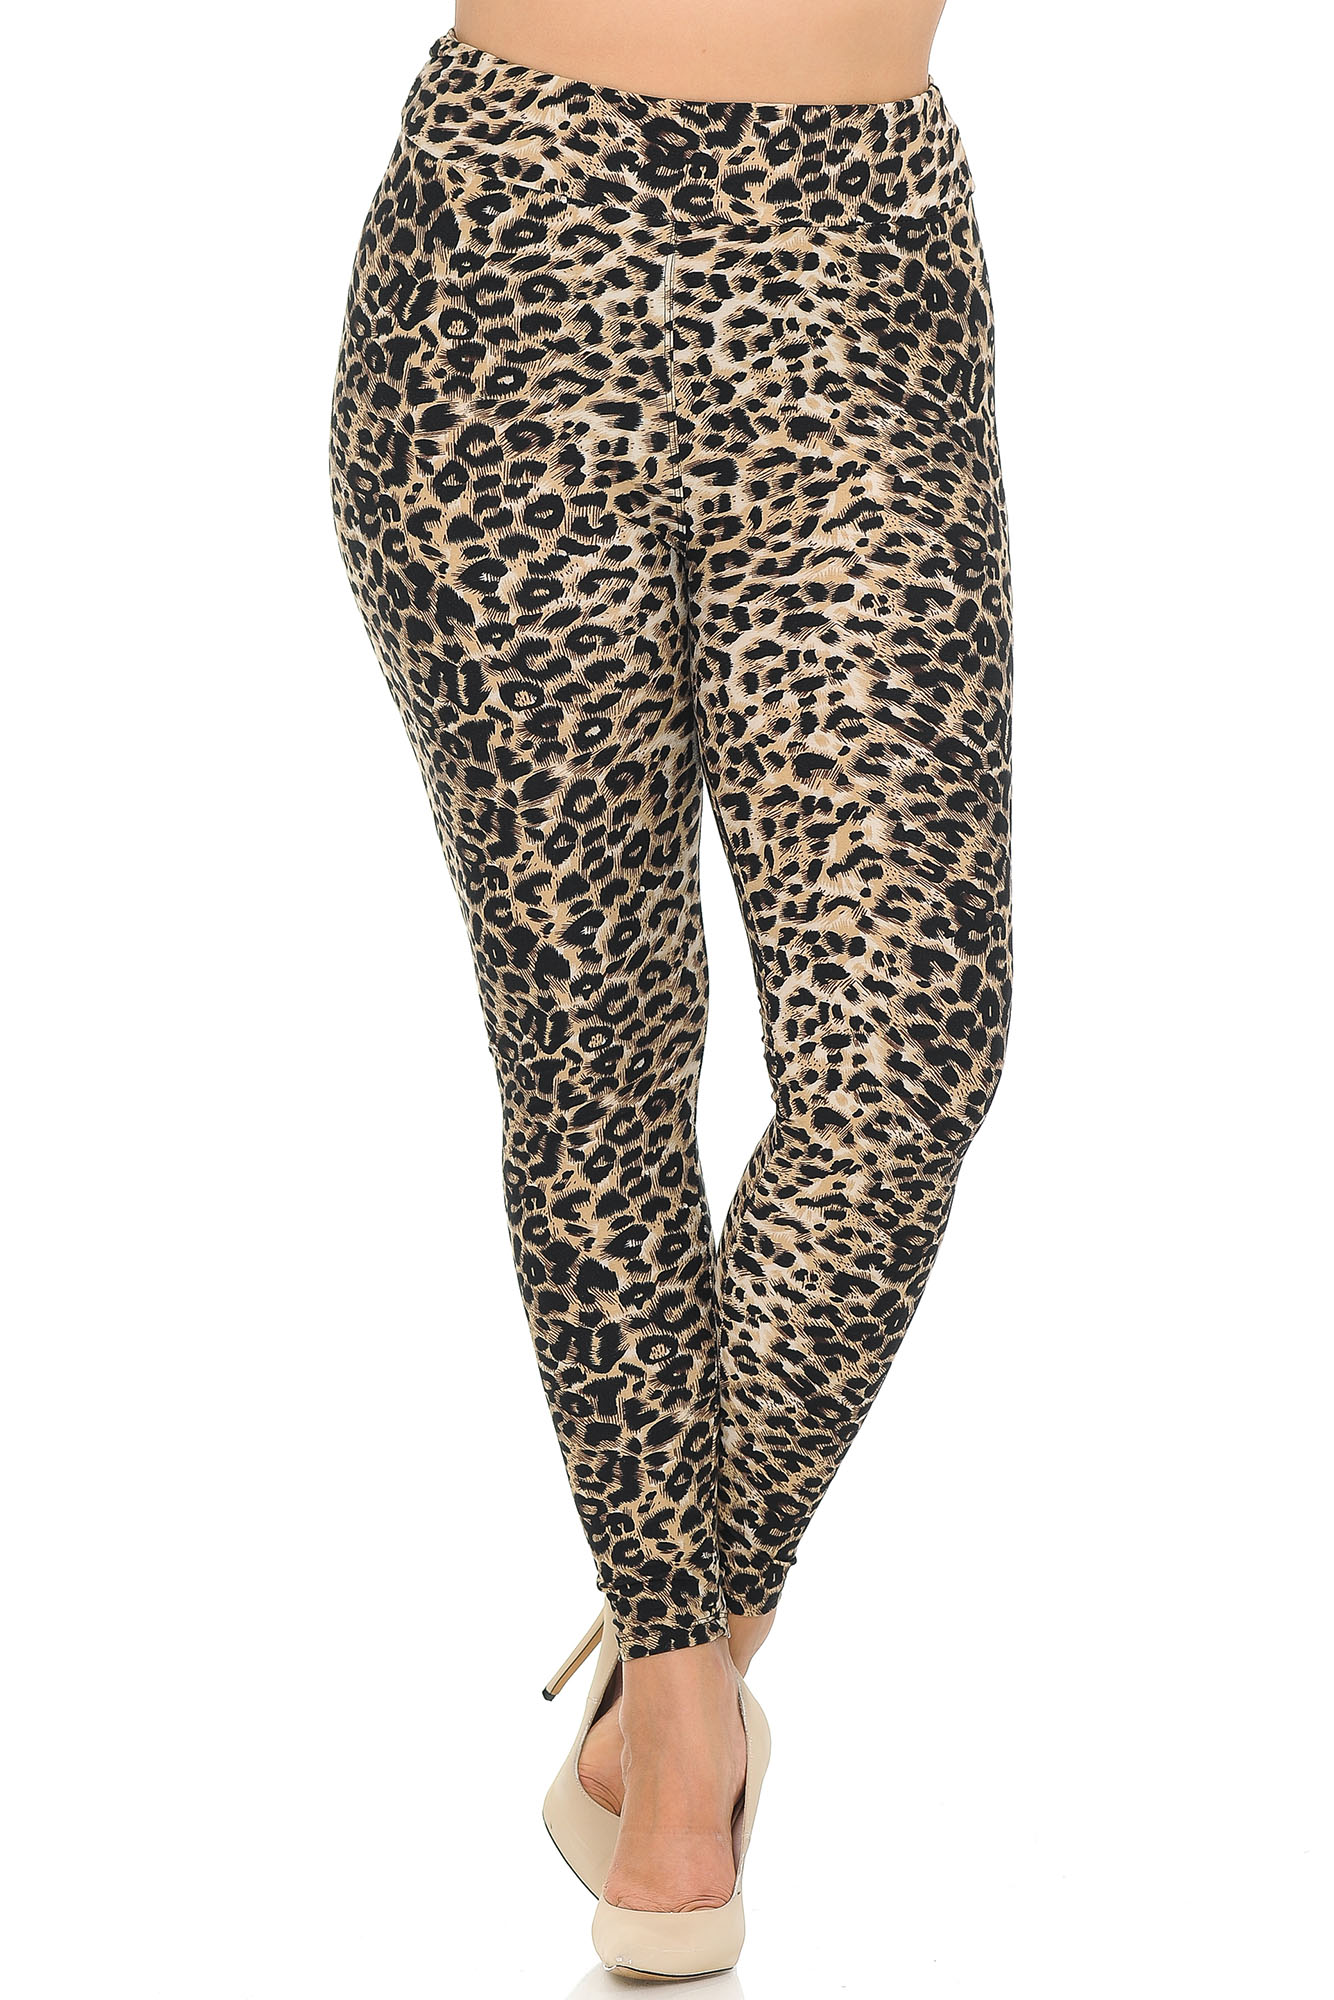 Wholesale Buttery Smooth Feral Cheetah Plus Size High Waisted Leggings